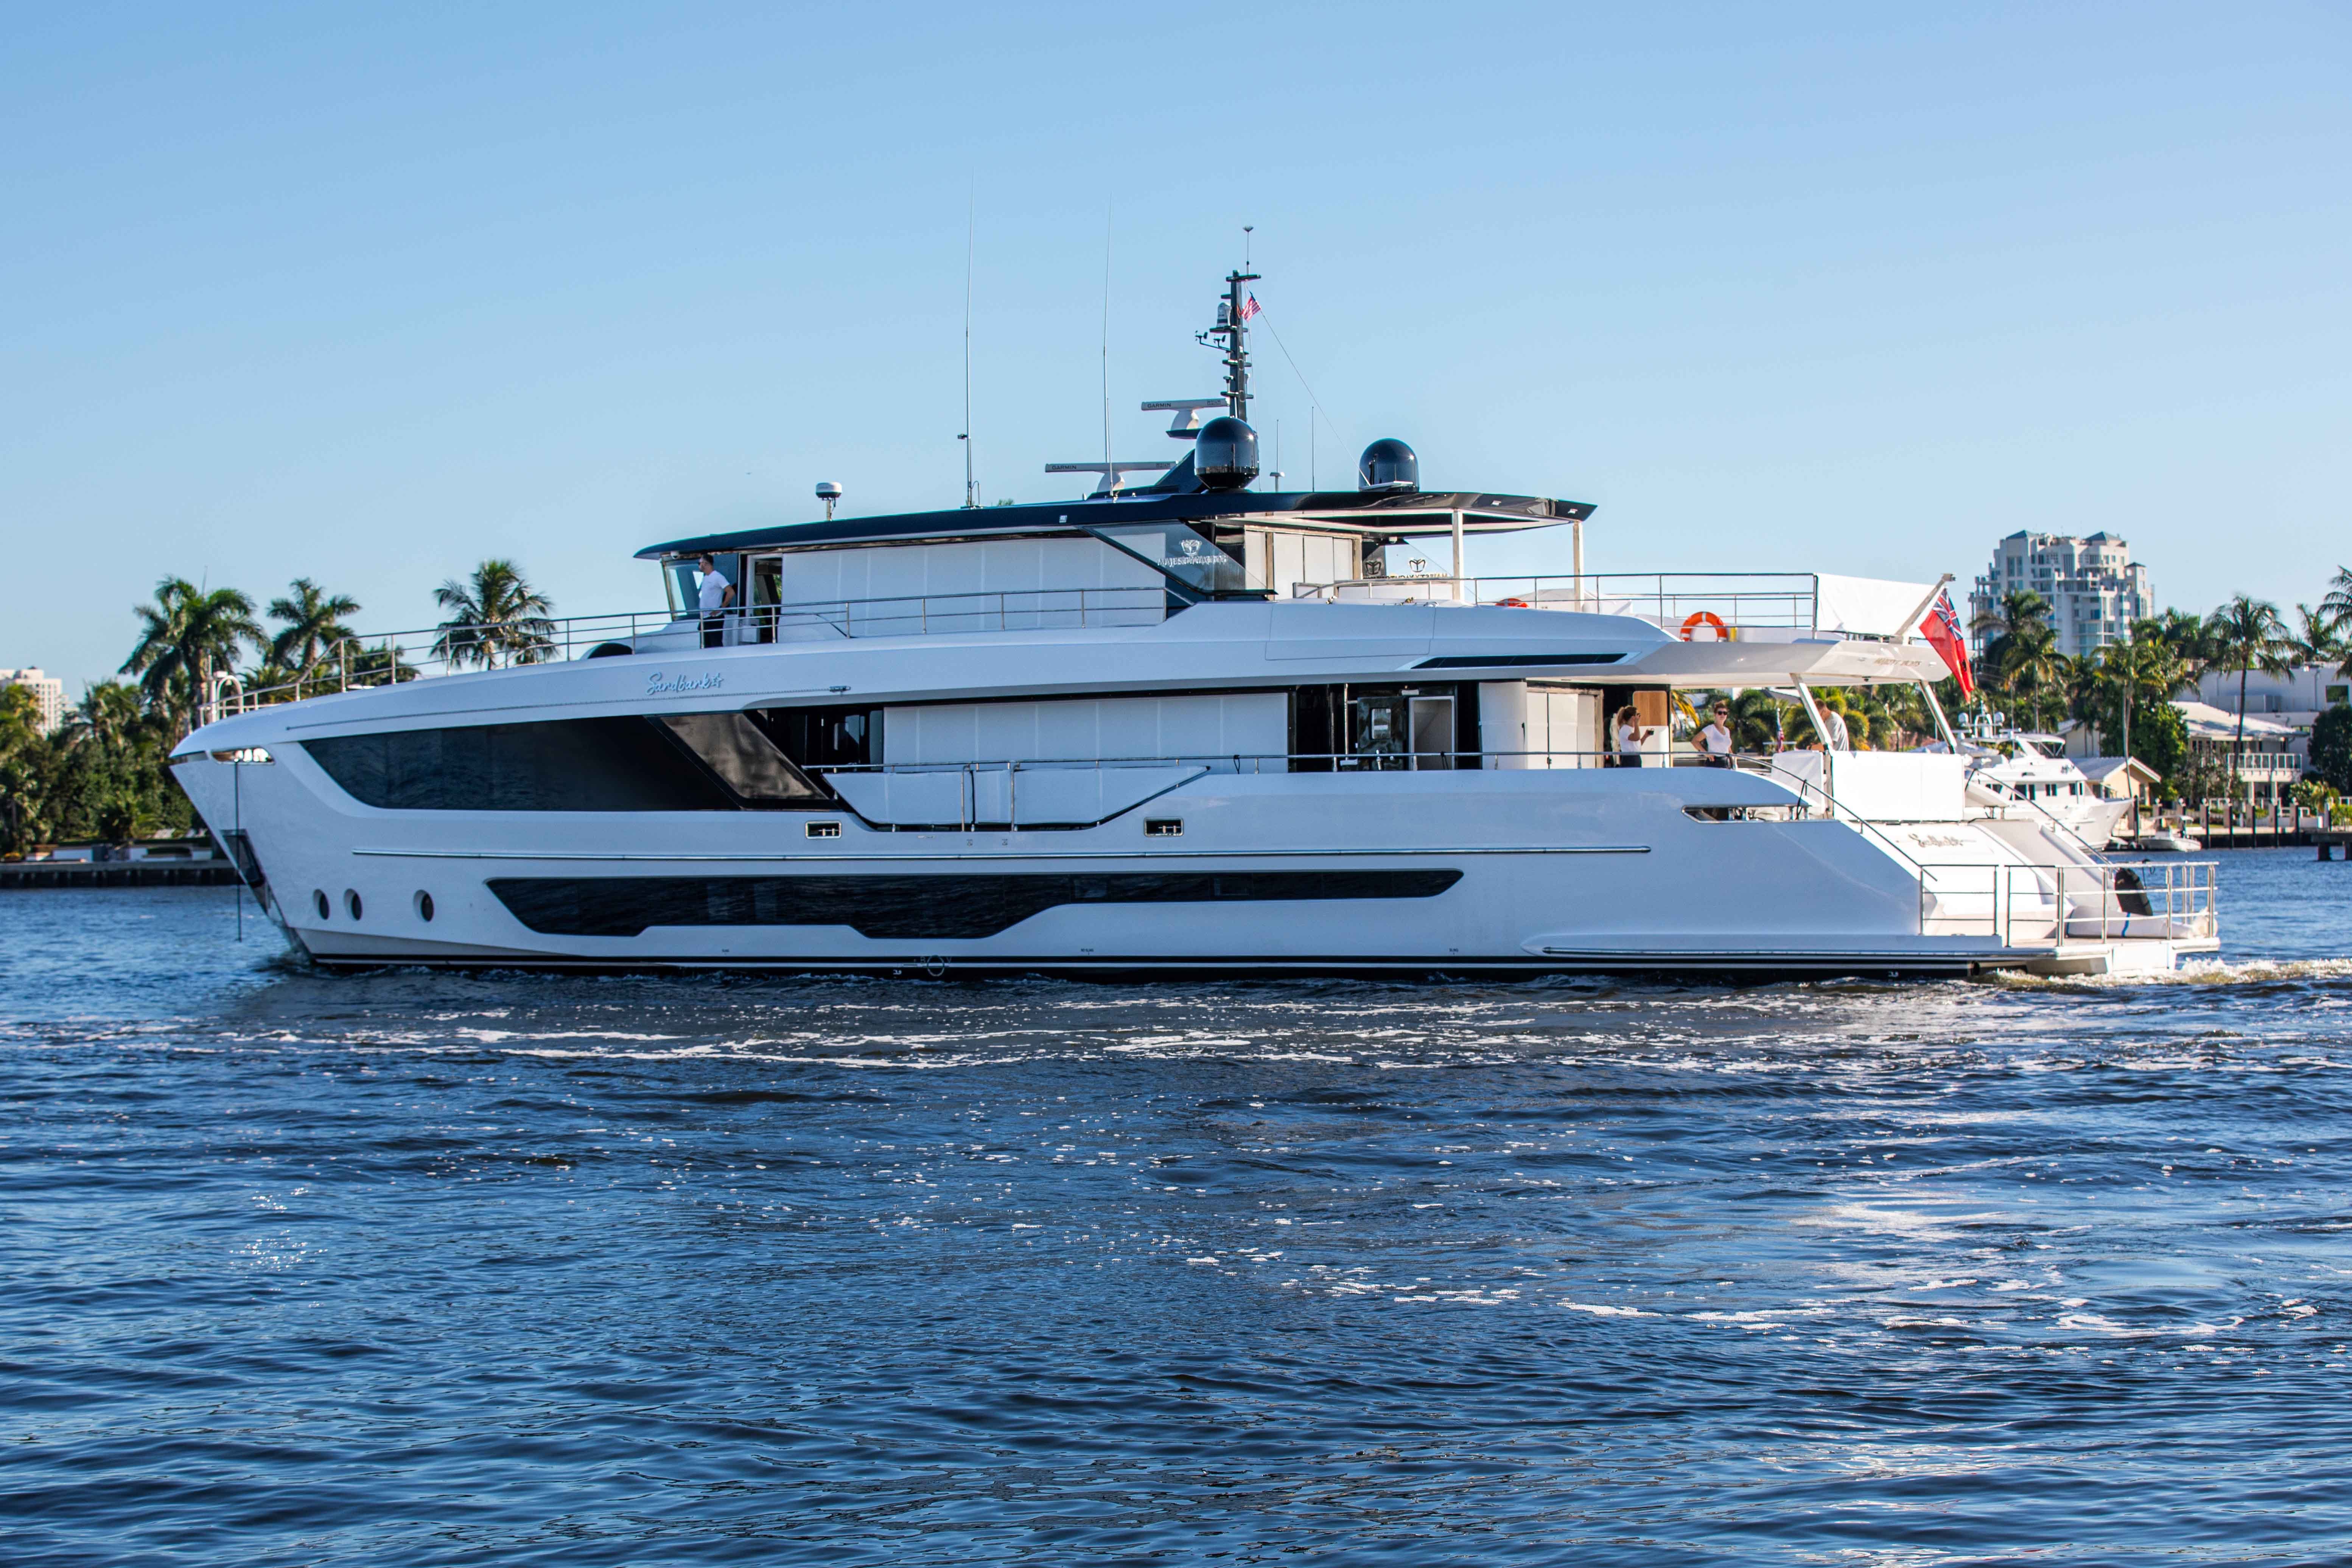 Majesty 111 - Arrival at FLIBS 4